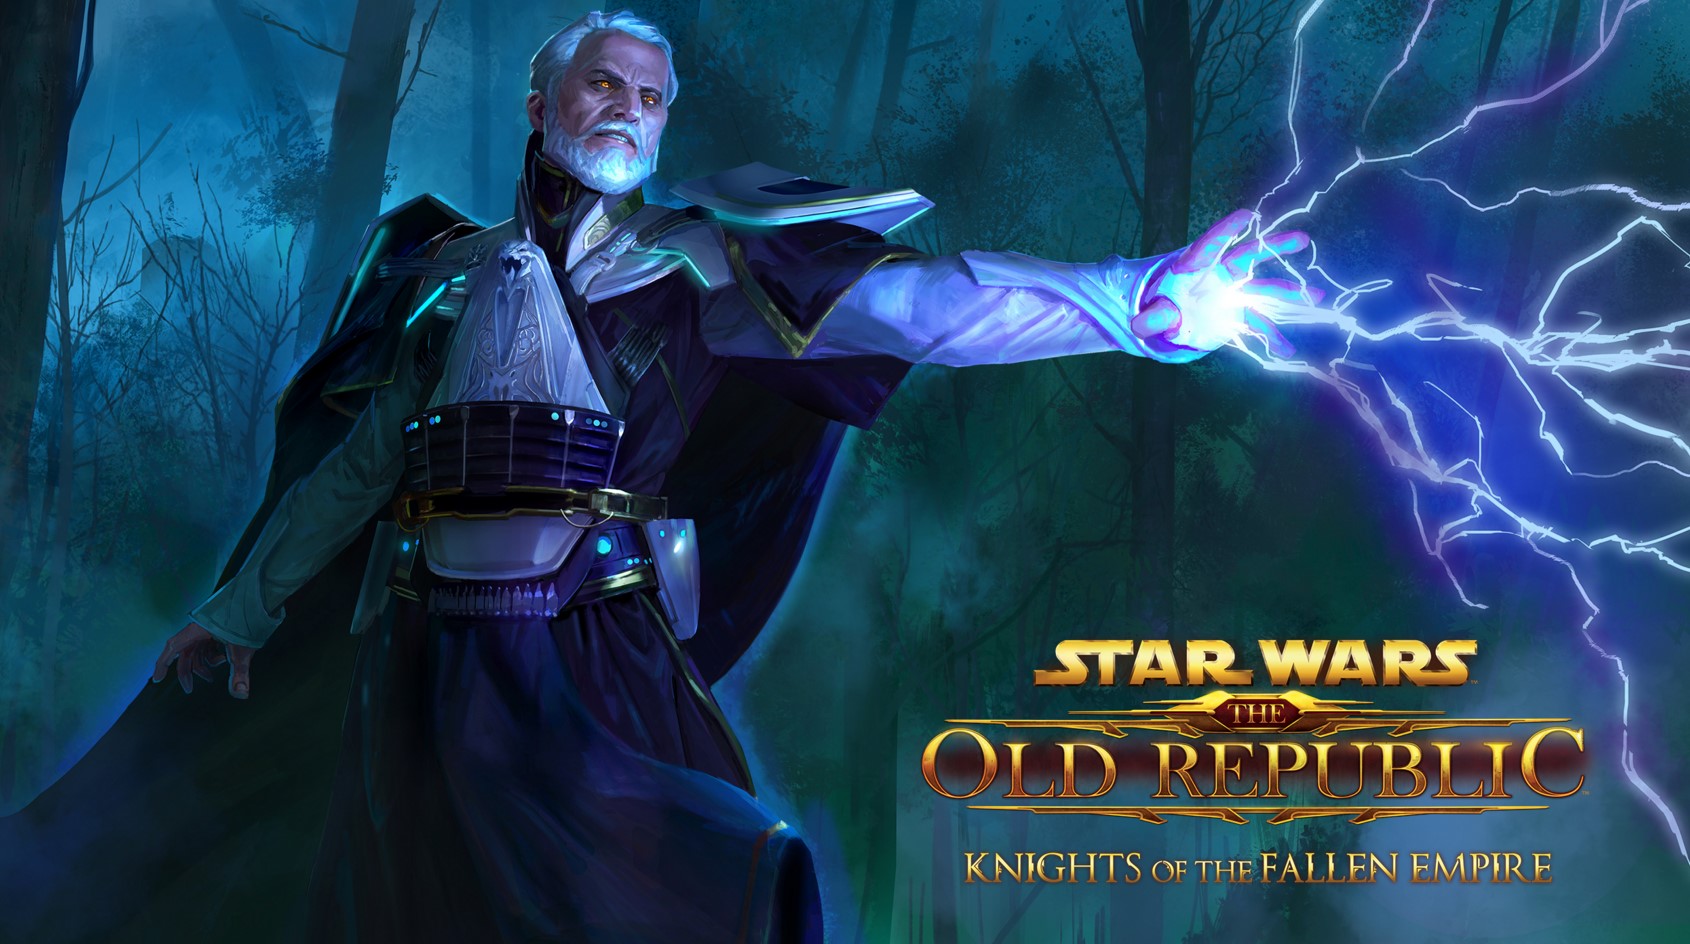 sworvisions Star Wars: The Old Republic - Knights of the Fallen Empire "Visions in the Dark" Teaser